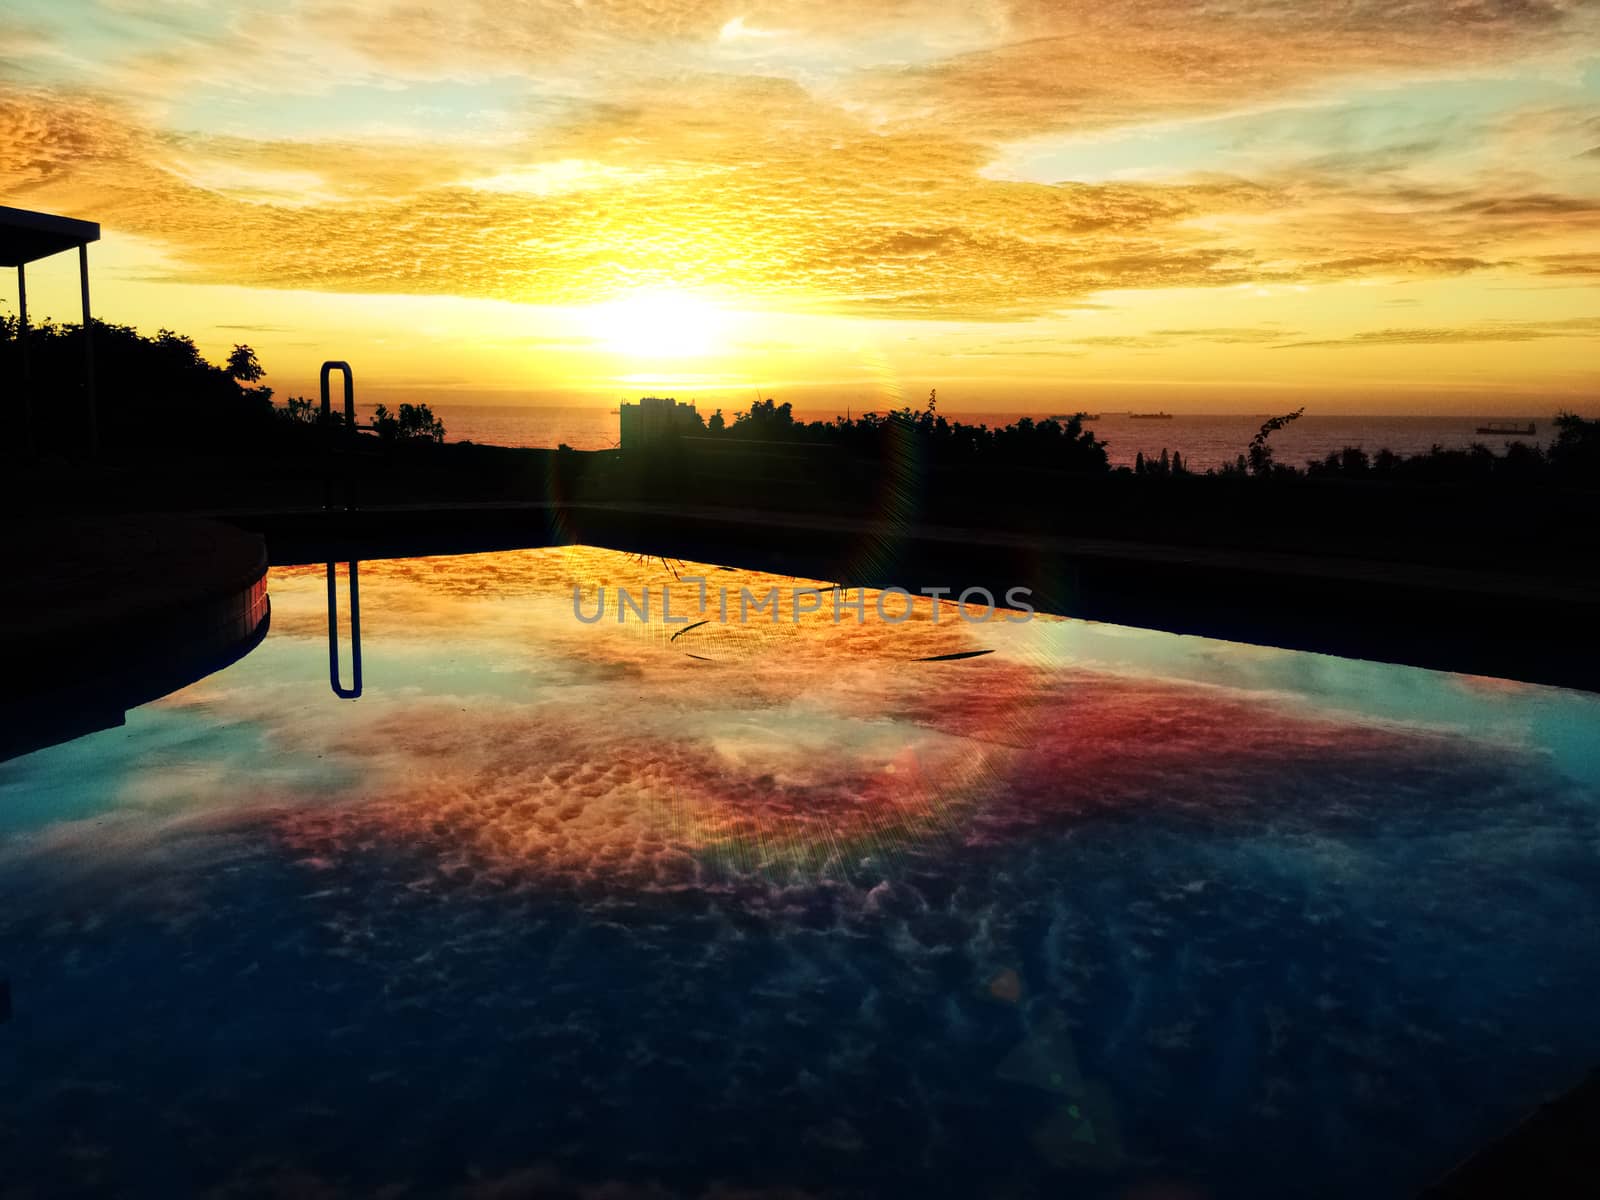 Sunset In Africa over pool by stockbp